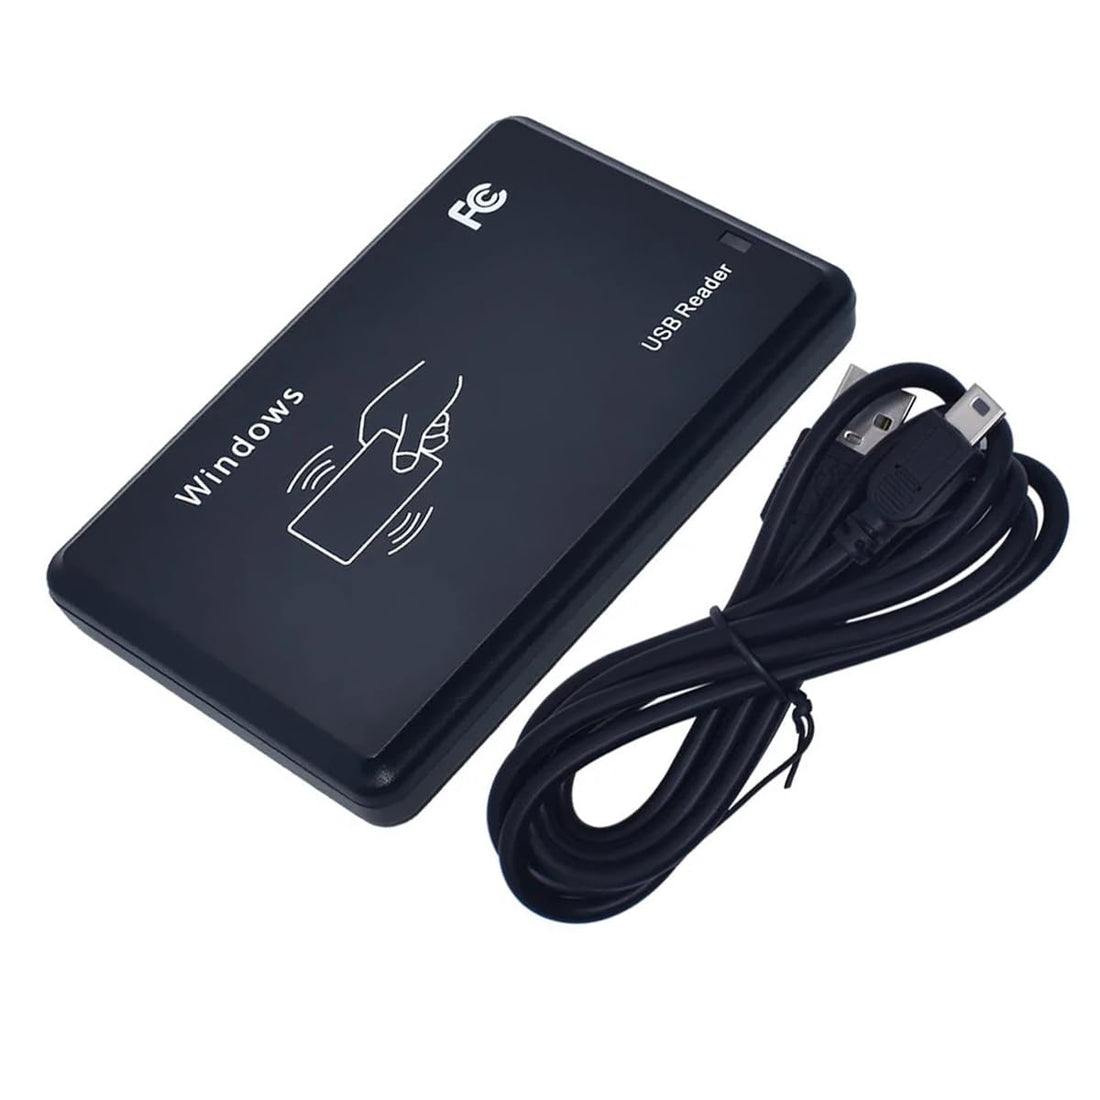 125Khz EM4100 USB RFID ID Card Reader Swipe Card Reader Plug and Play with Cable First 10 Digit